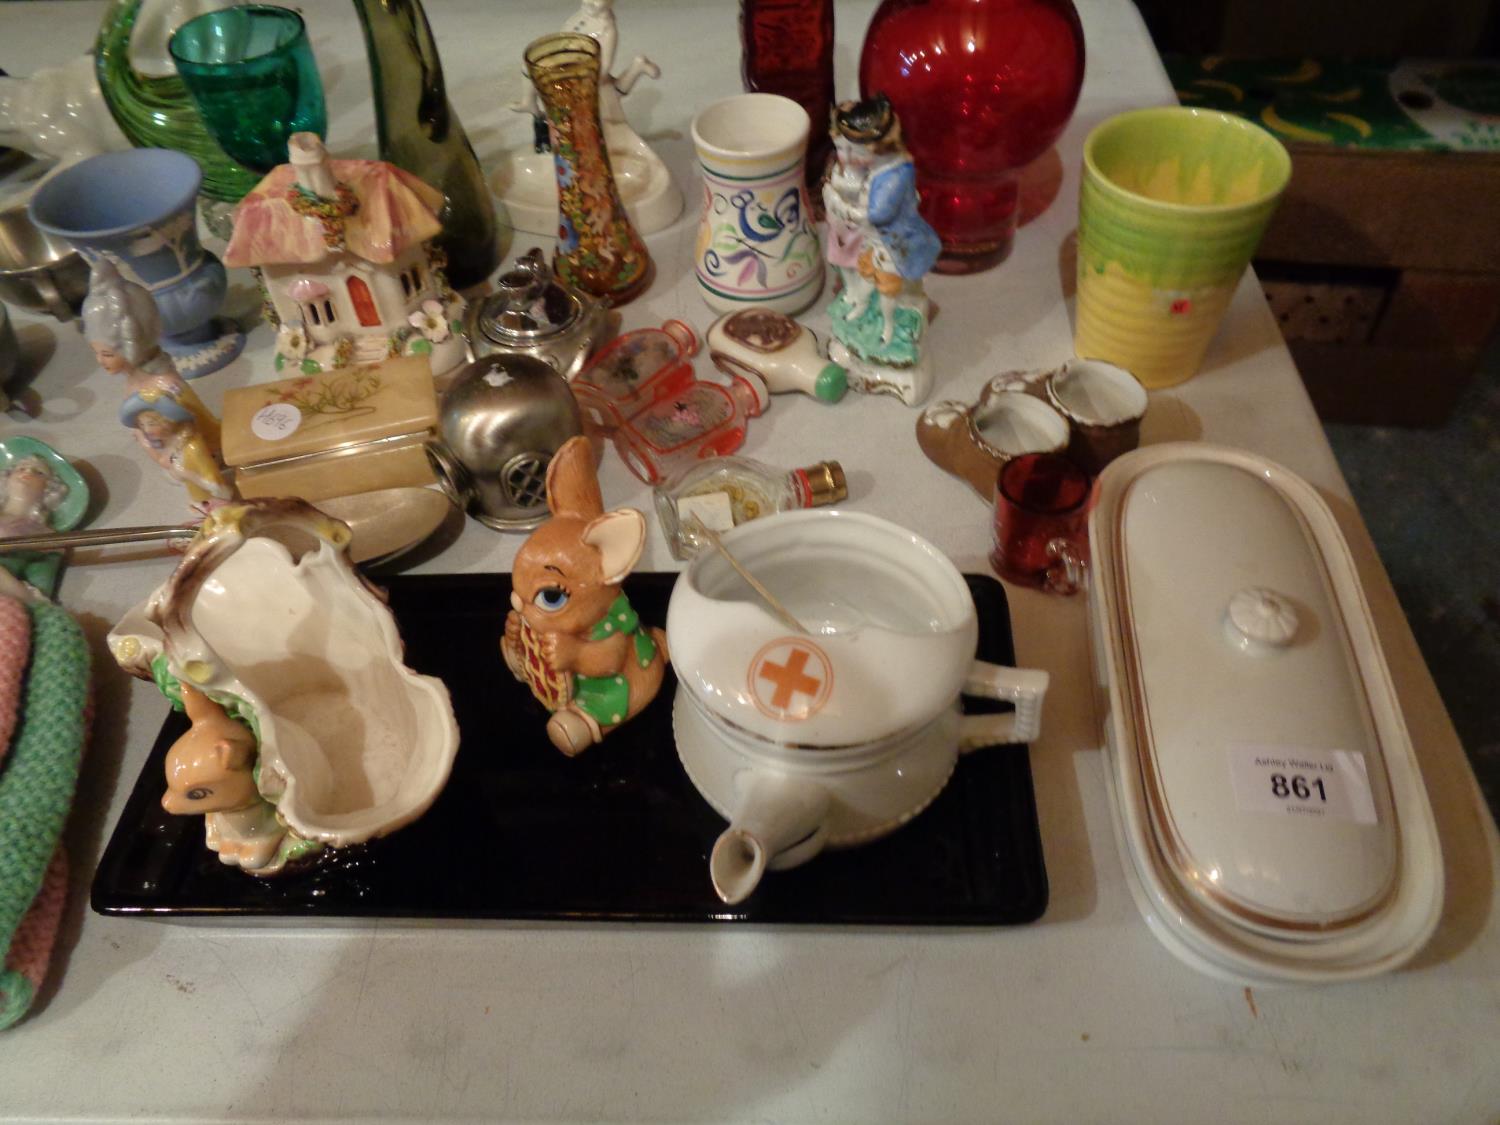 A MIXED SELECTION OF ITEMS TO INCLUDE SMALL VASES, A TRINKET TRAY AND SOME CERAMIC ITEMS - Image 5 of 5